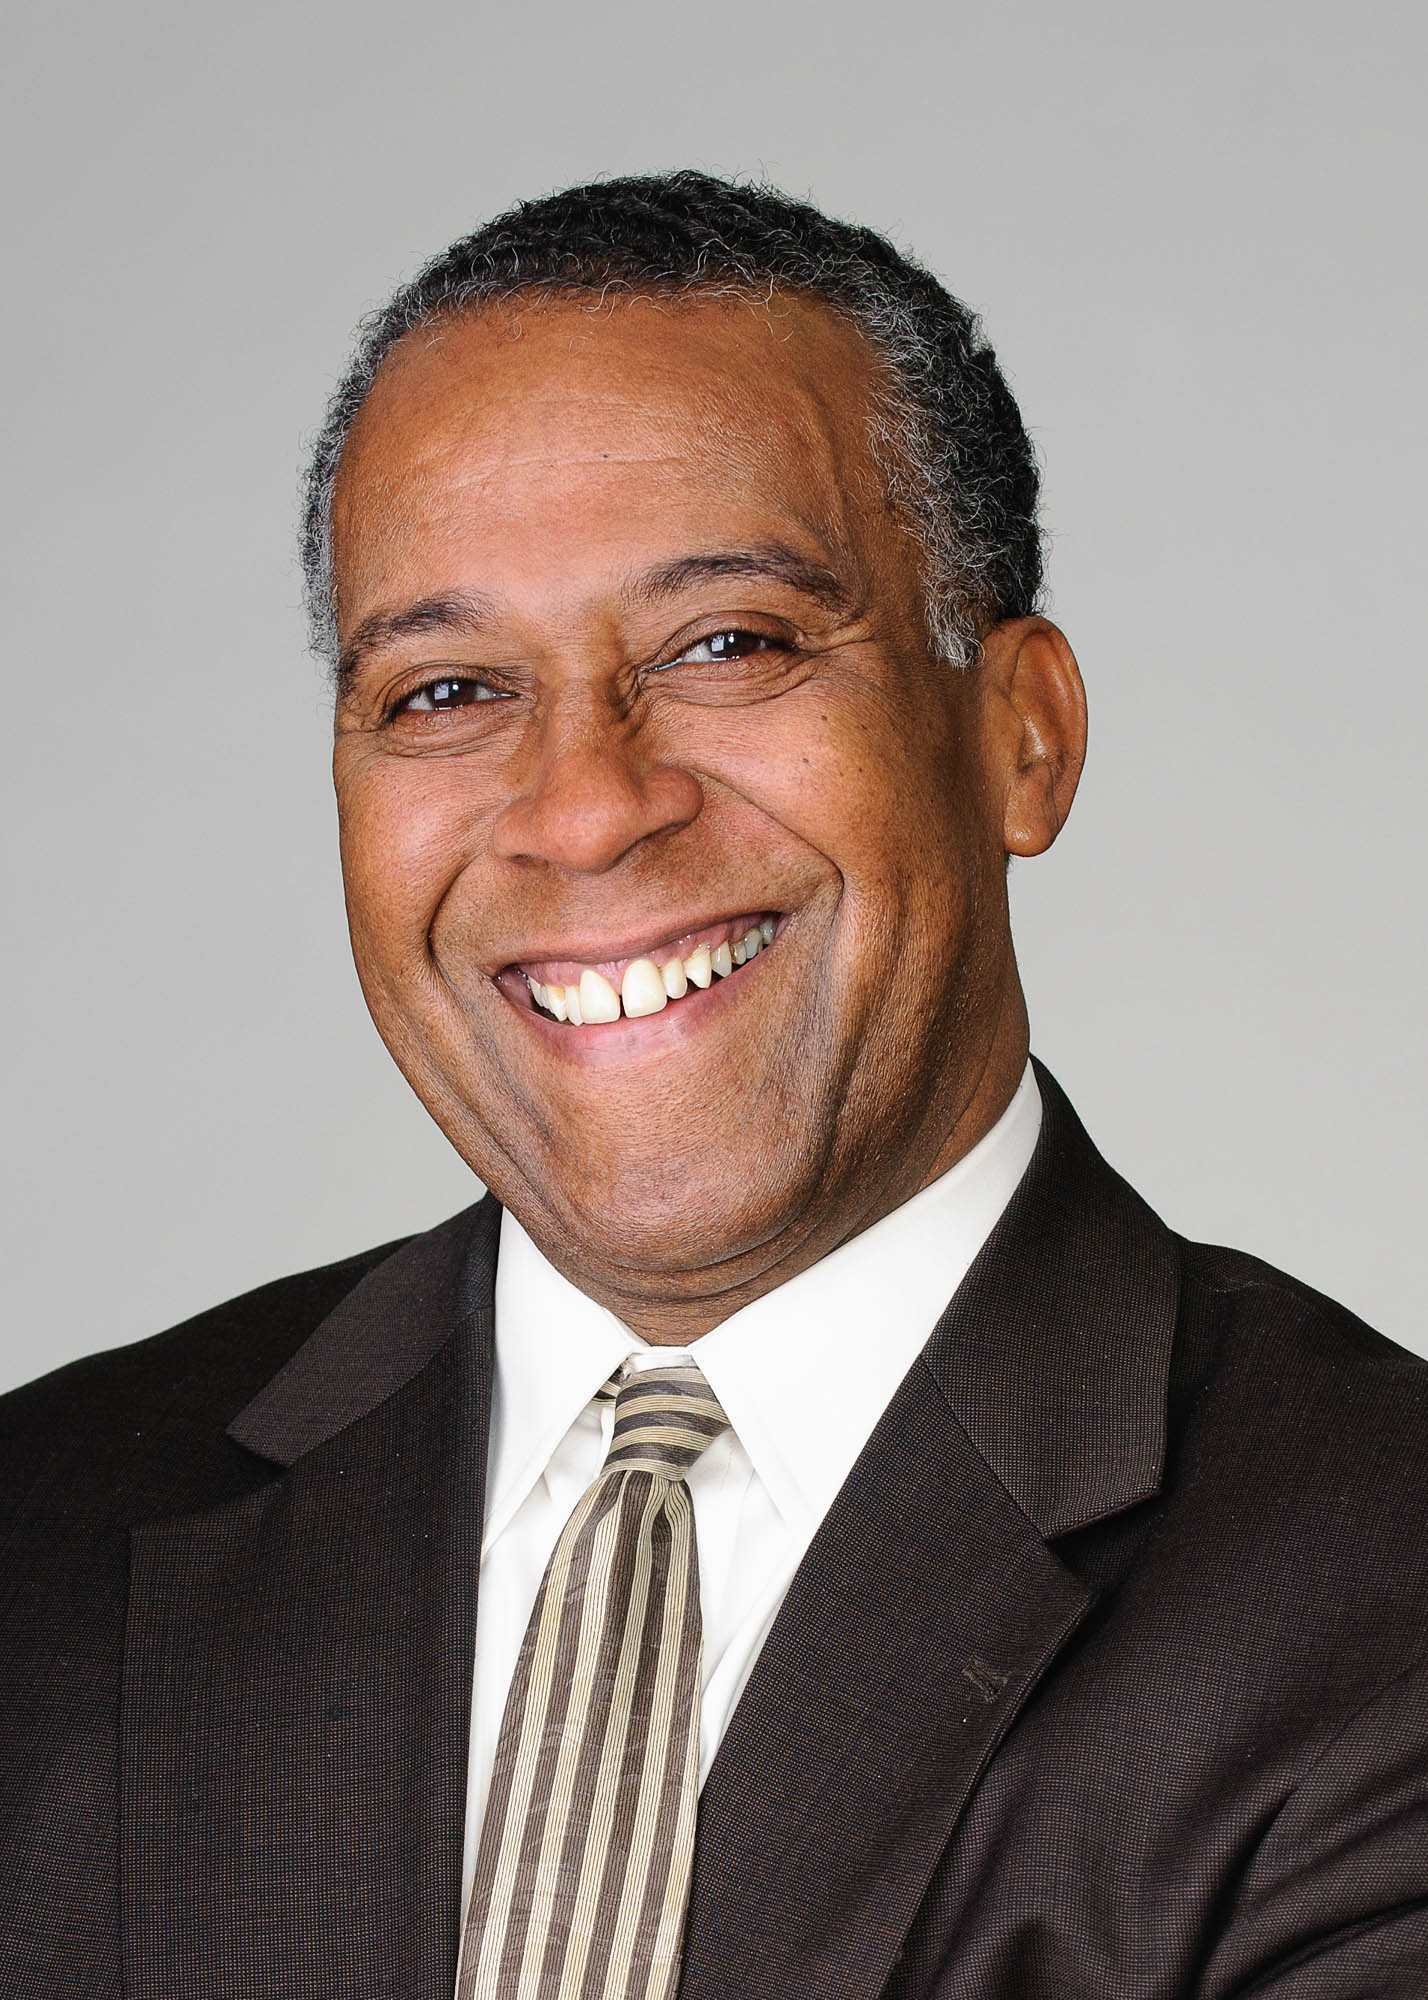 casual business portrait of middle aged African American male